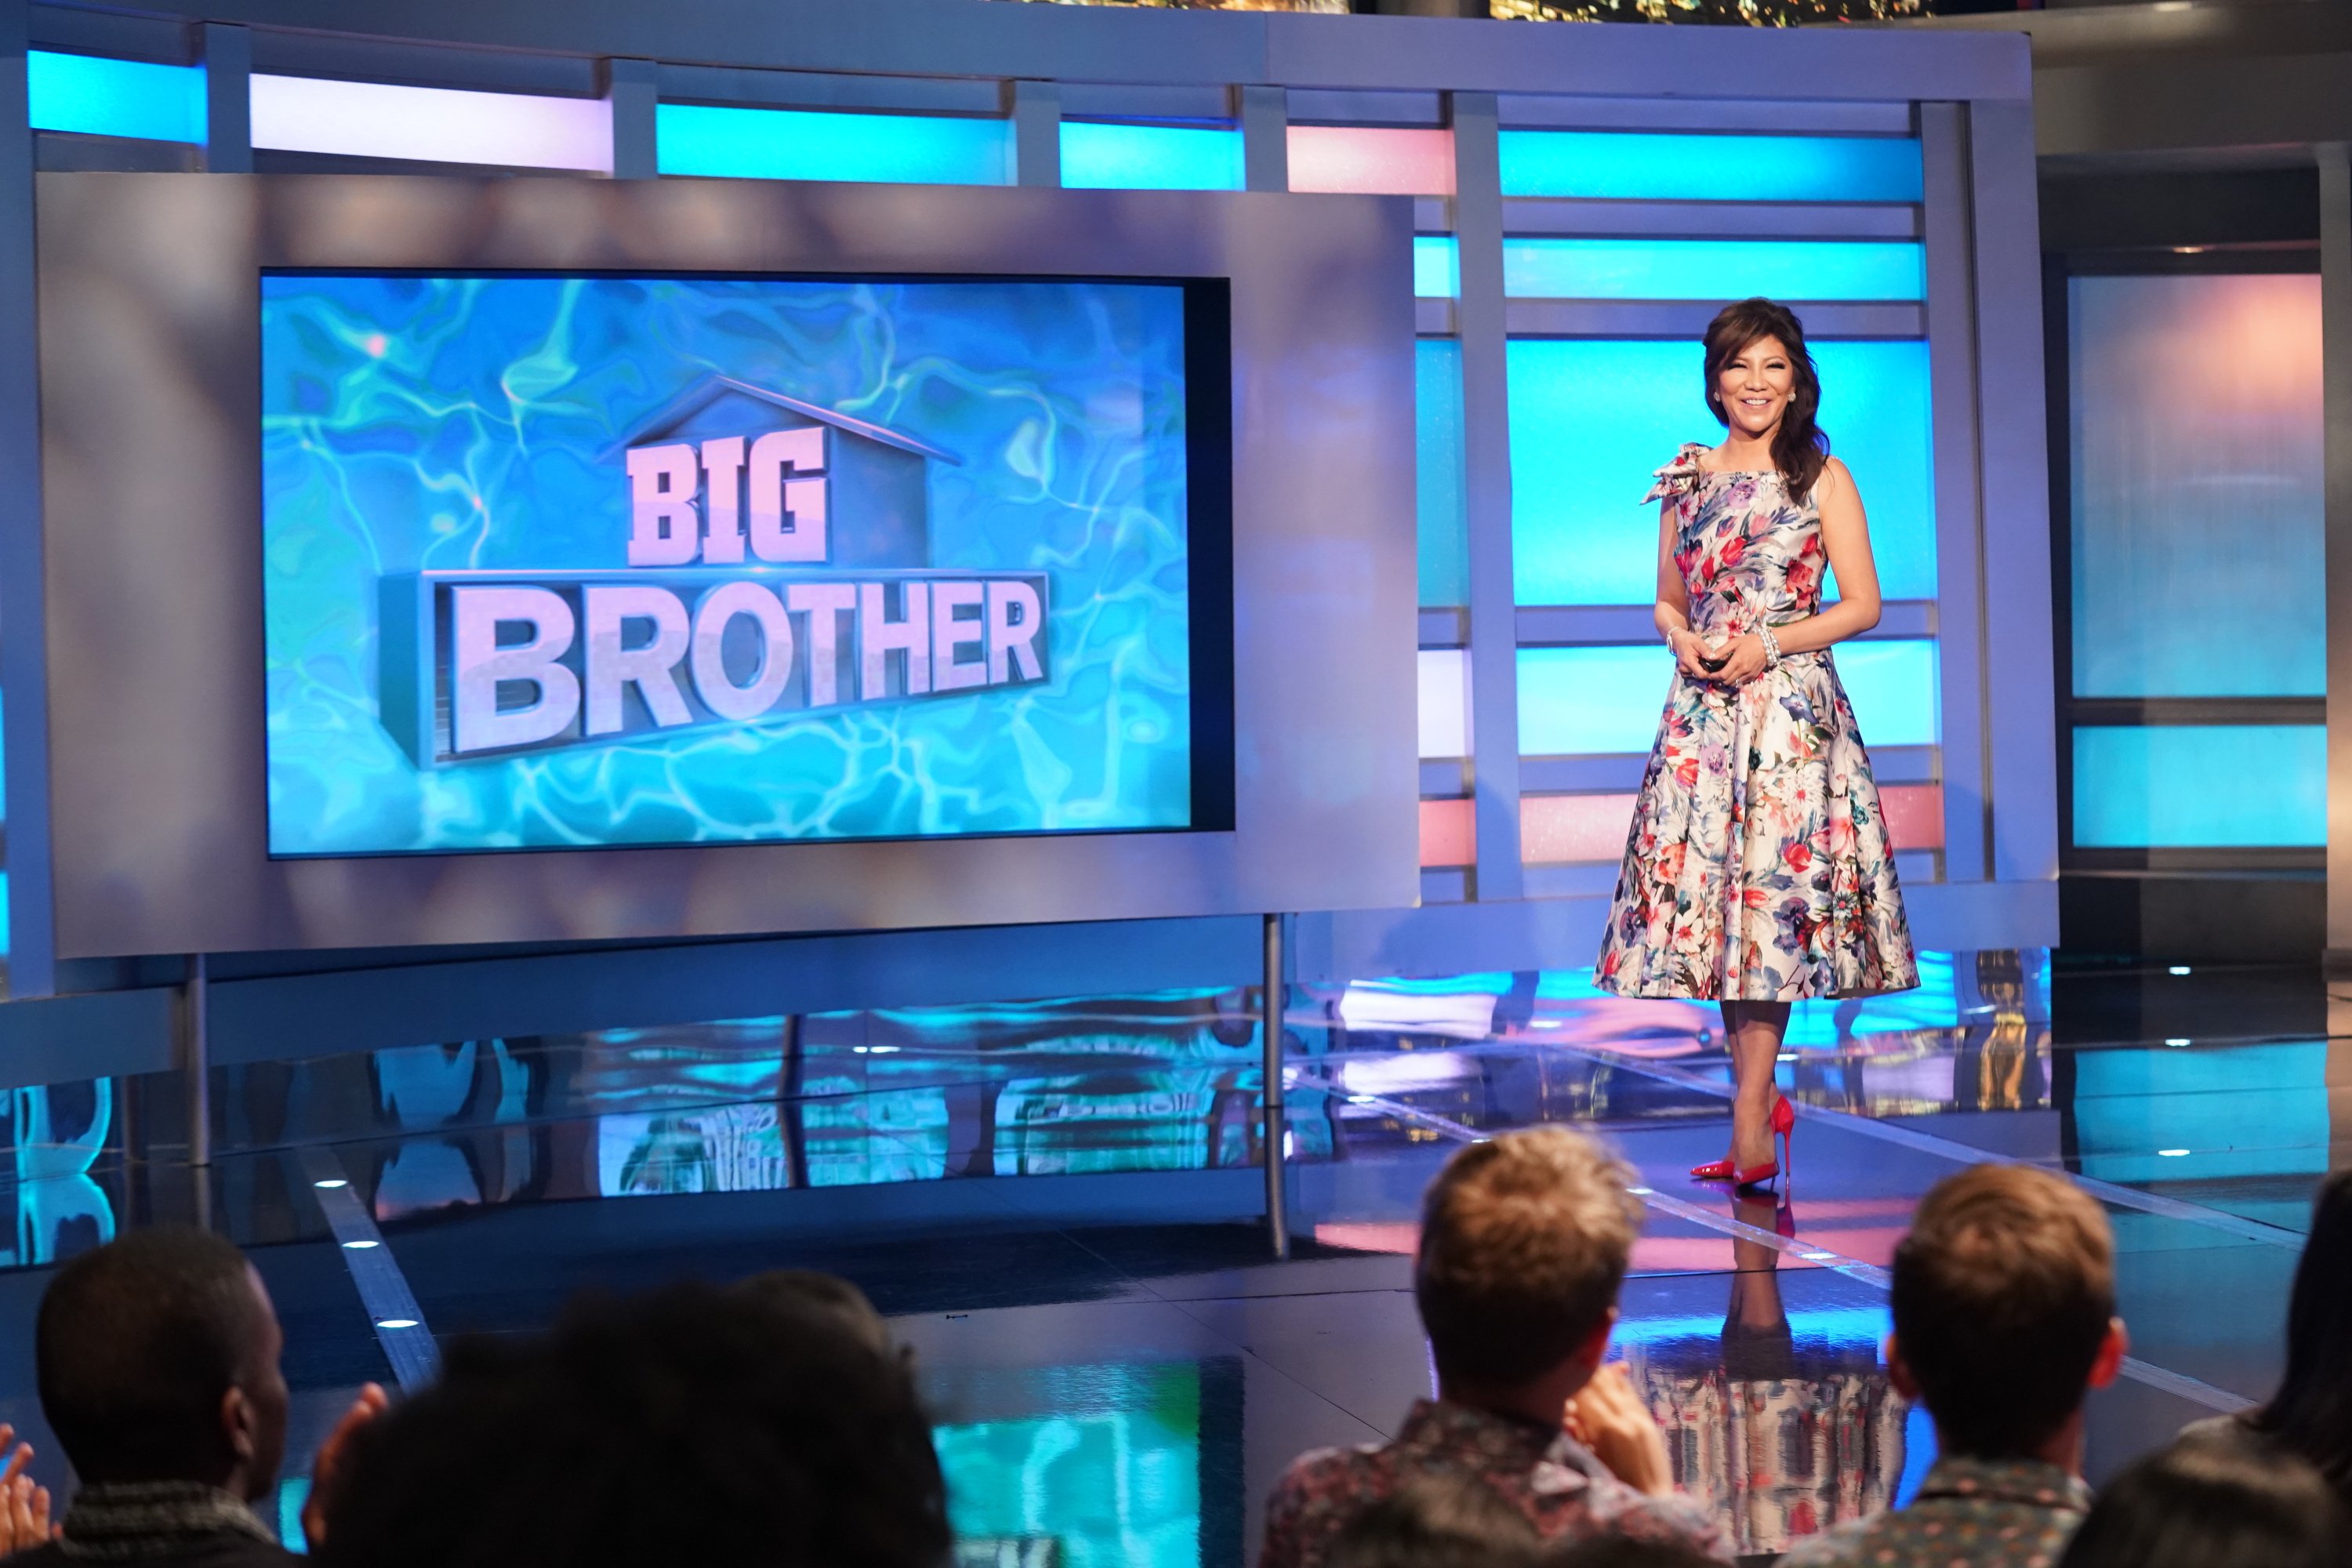 Julie Chen Moonves, who revealed the 'Big Brother' Season 24 twist, wears a red, green, and white floral dress on the 'Big Brother' stage.